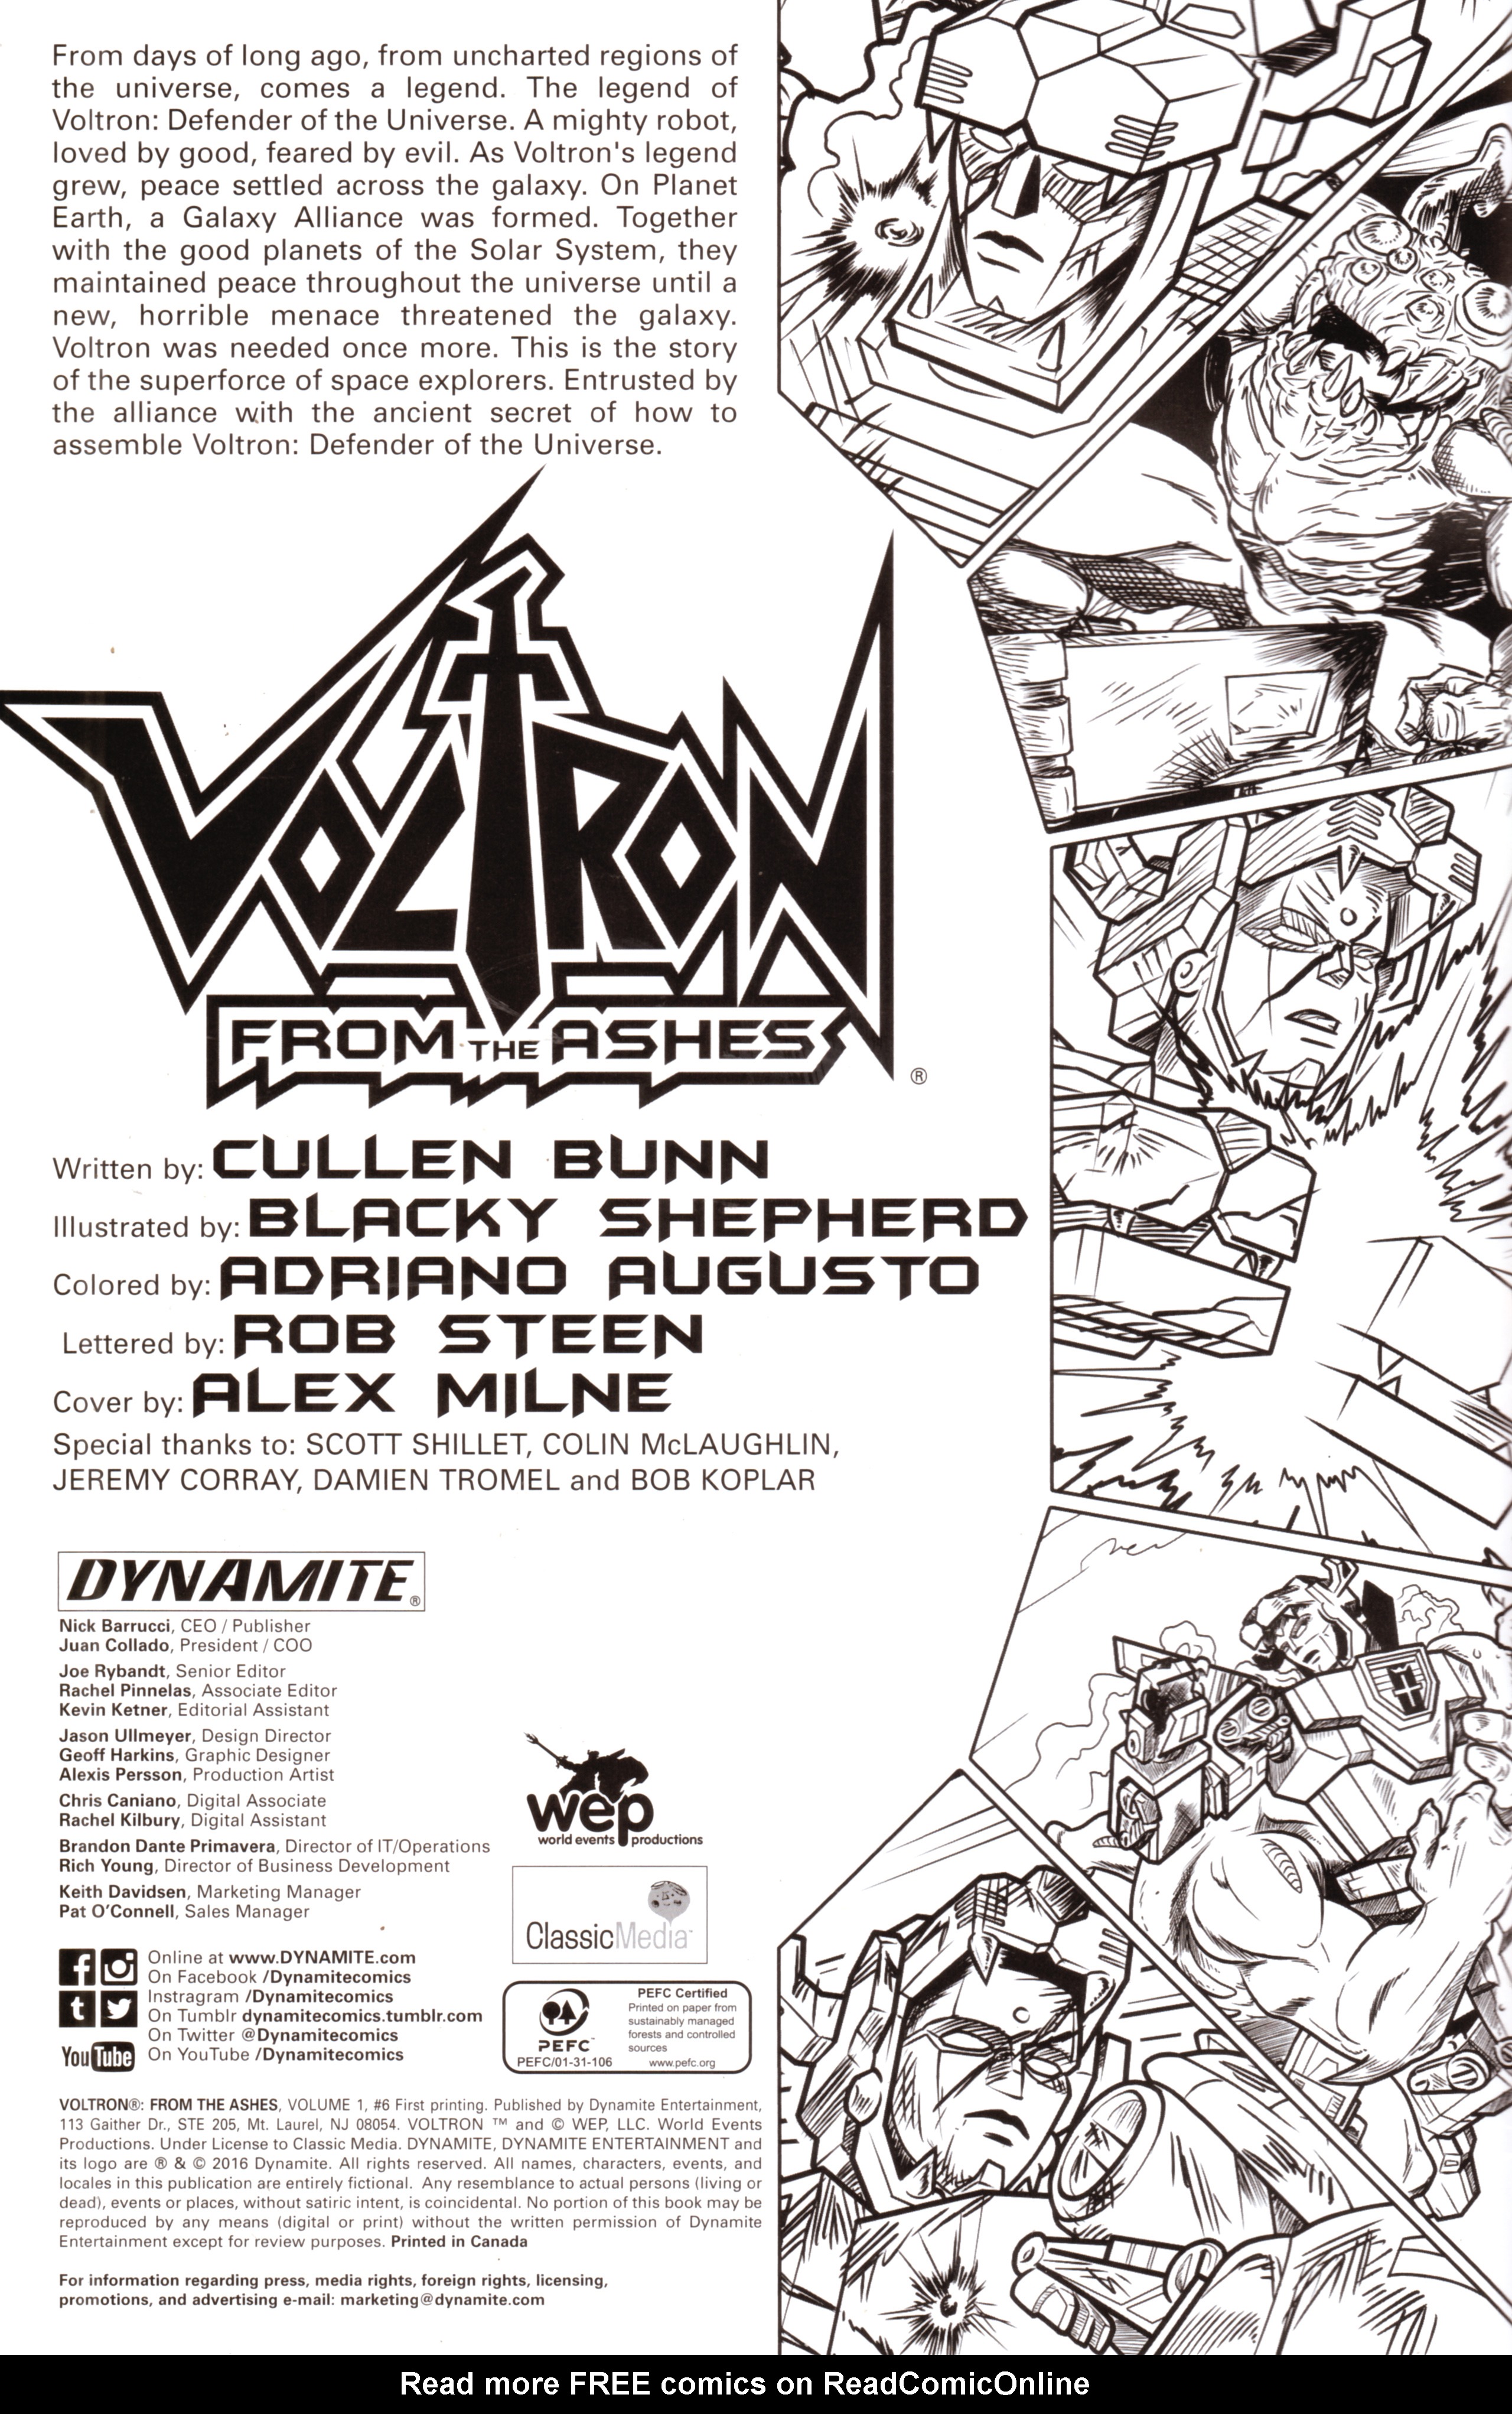 Read online Voltron: From the Ashes comic -  Issue #6 - 2